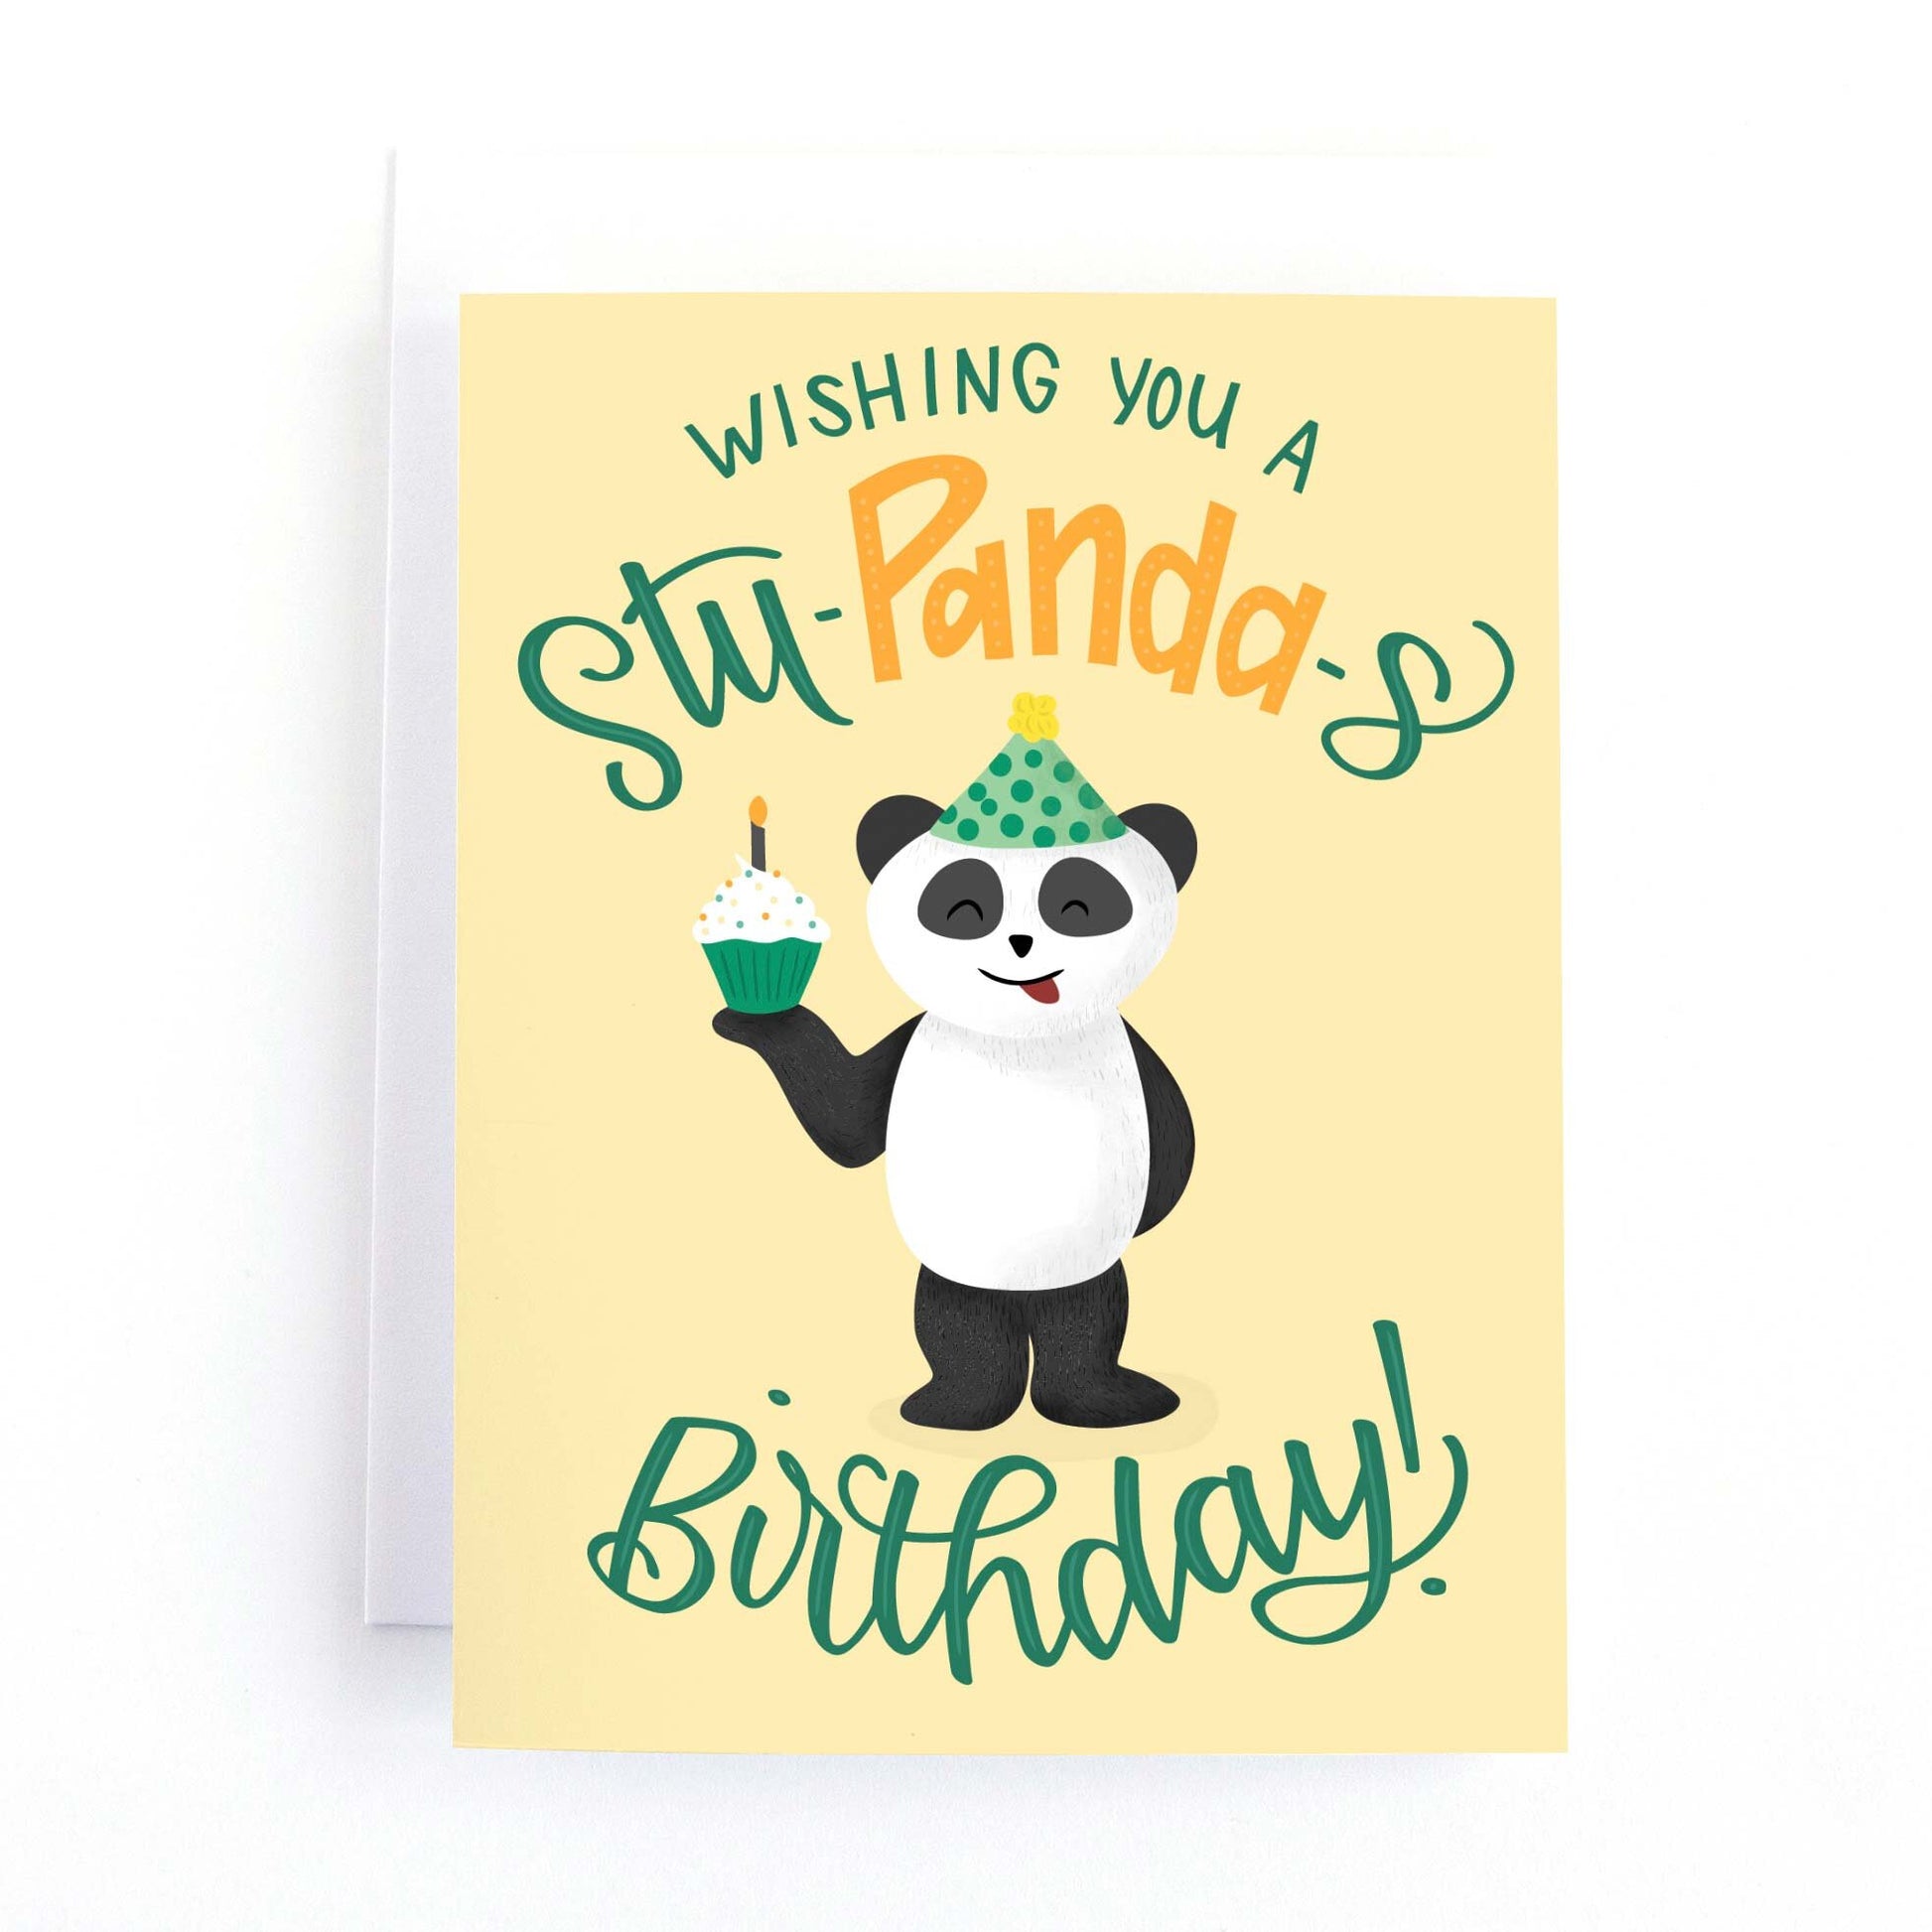 Cute kids birthday card with a Panda ready to party and a playful pun, Wishing you a Stu-Panda-s Birthday